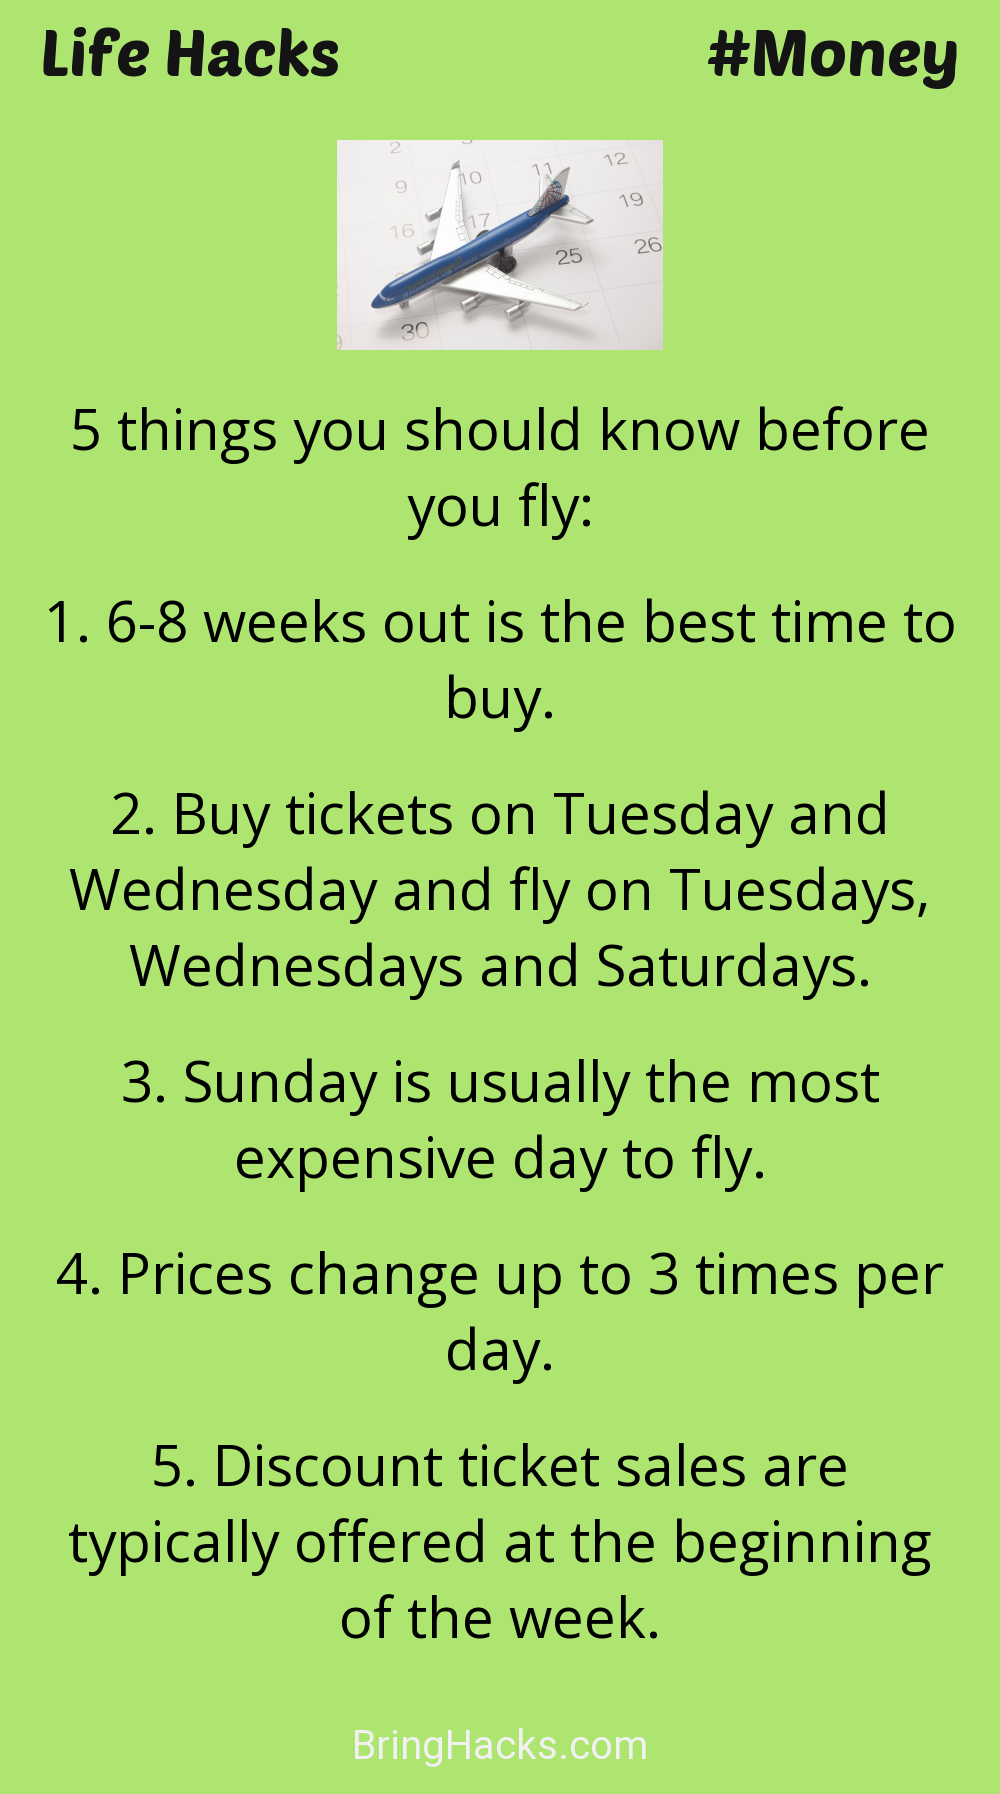 Life Hacks: - 5 things you should know before you fly:
6-8 weeks out is the best time to buy. Buy tickets on Tuesday and Wednesday and fly on Tuesdays, Wednesdays and Saturdays. Sunday is usually the most expensive day to fly. Prices change up to 3 times per day. Discount ticket sales are typically offered at the beginning of the week.